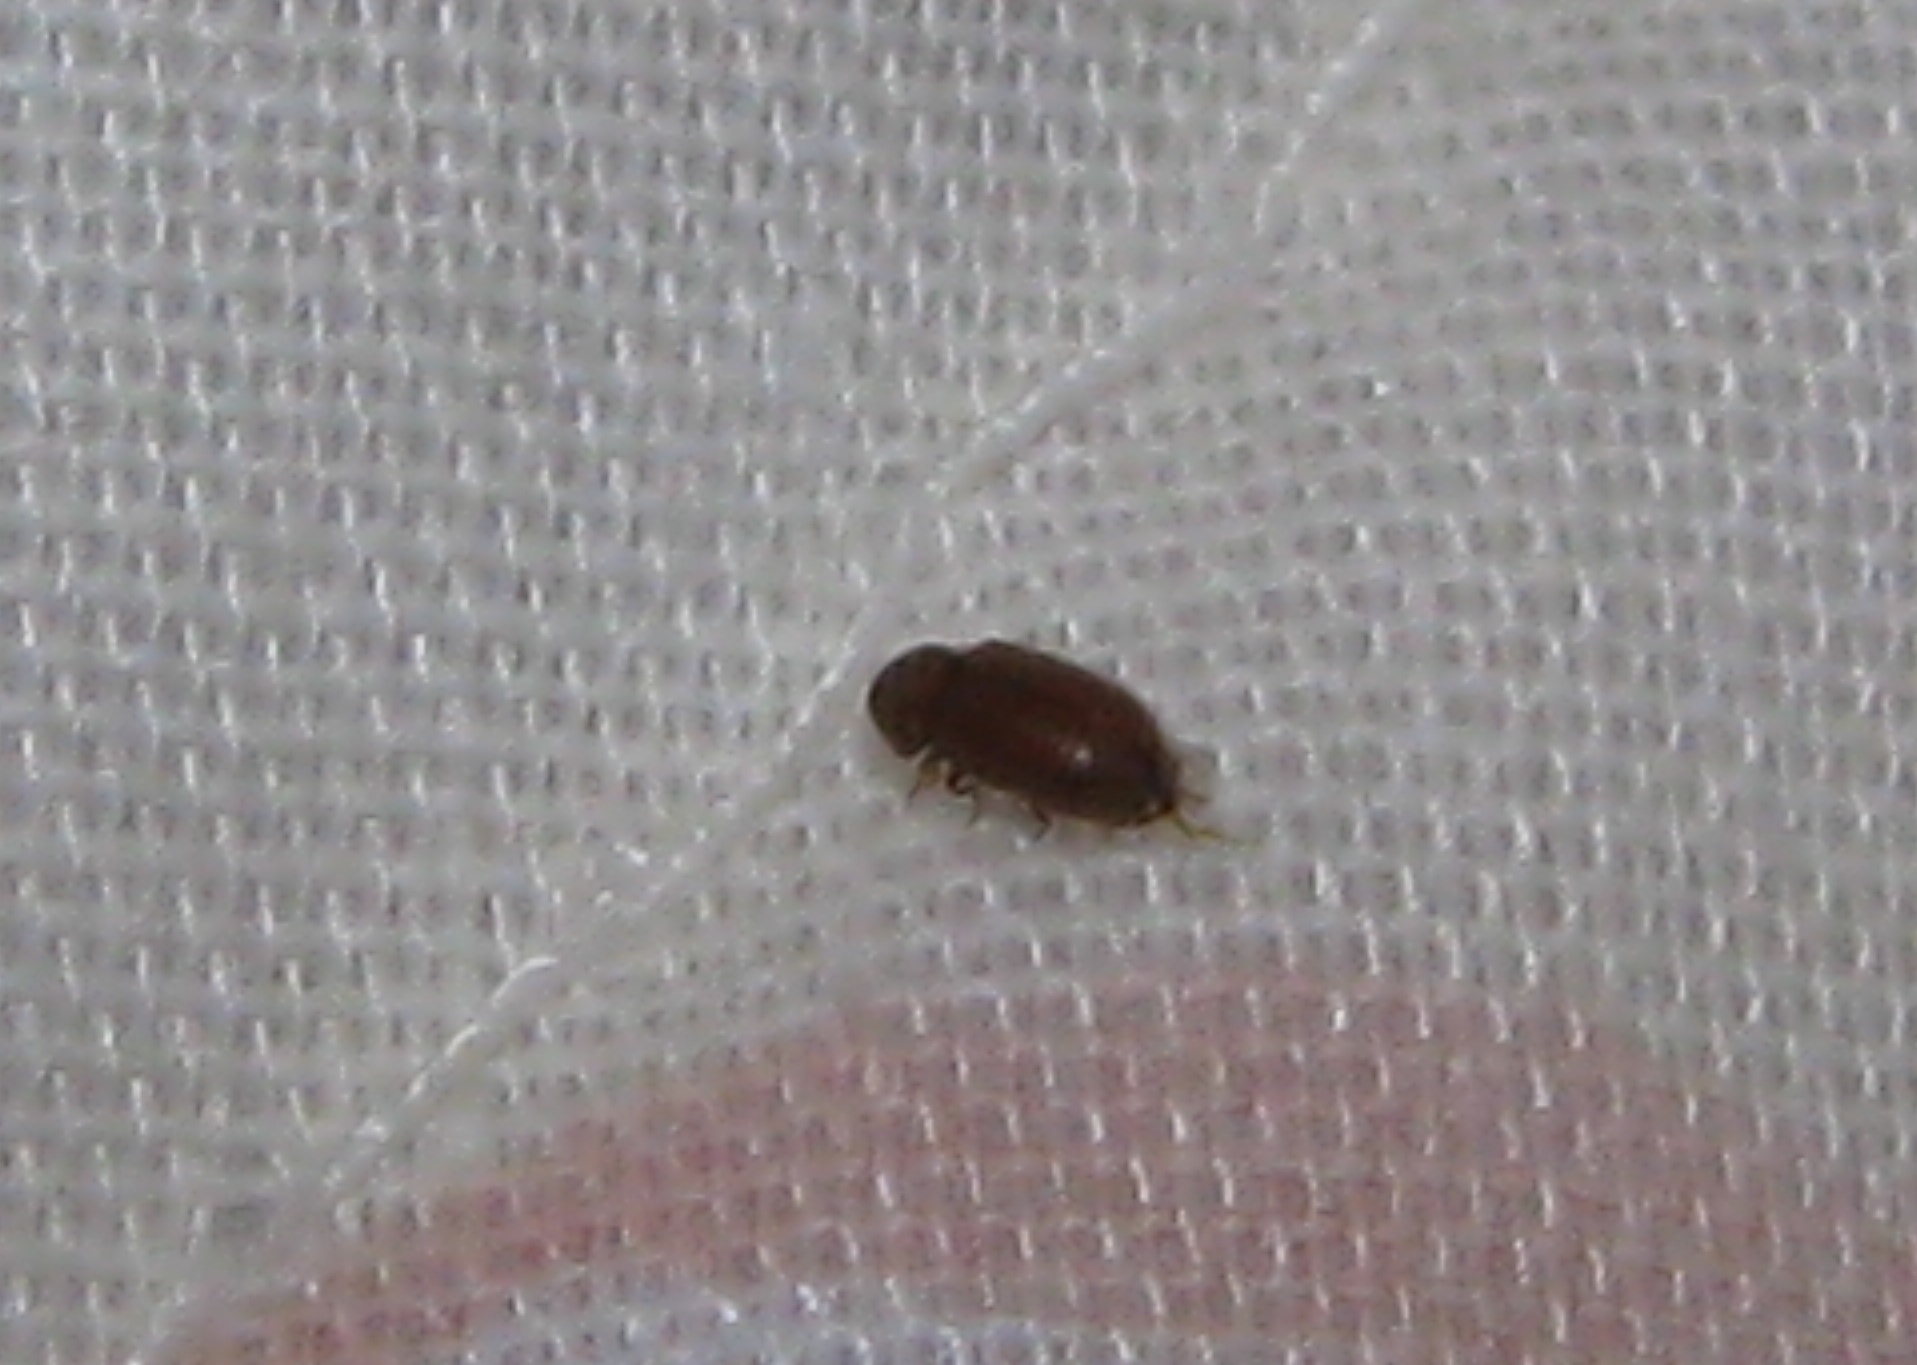 NaturePlus: What is this small brown beetle?